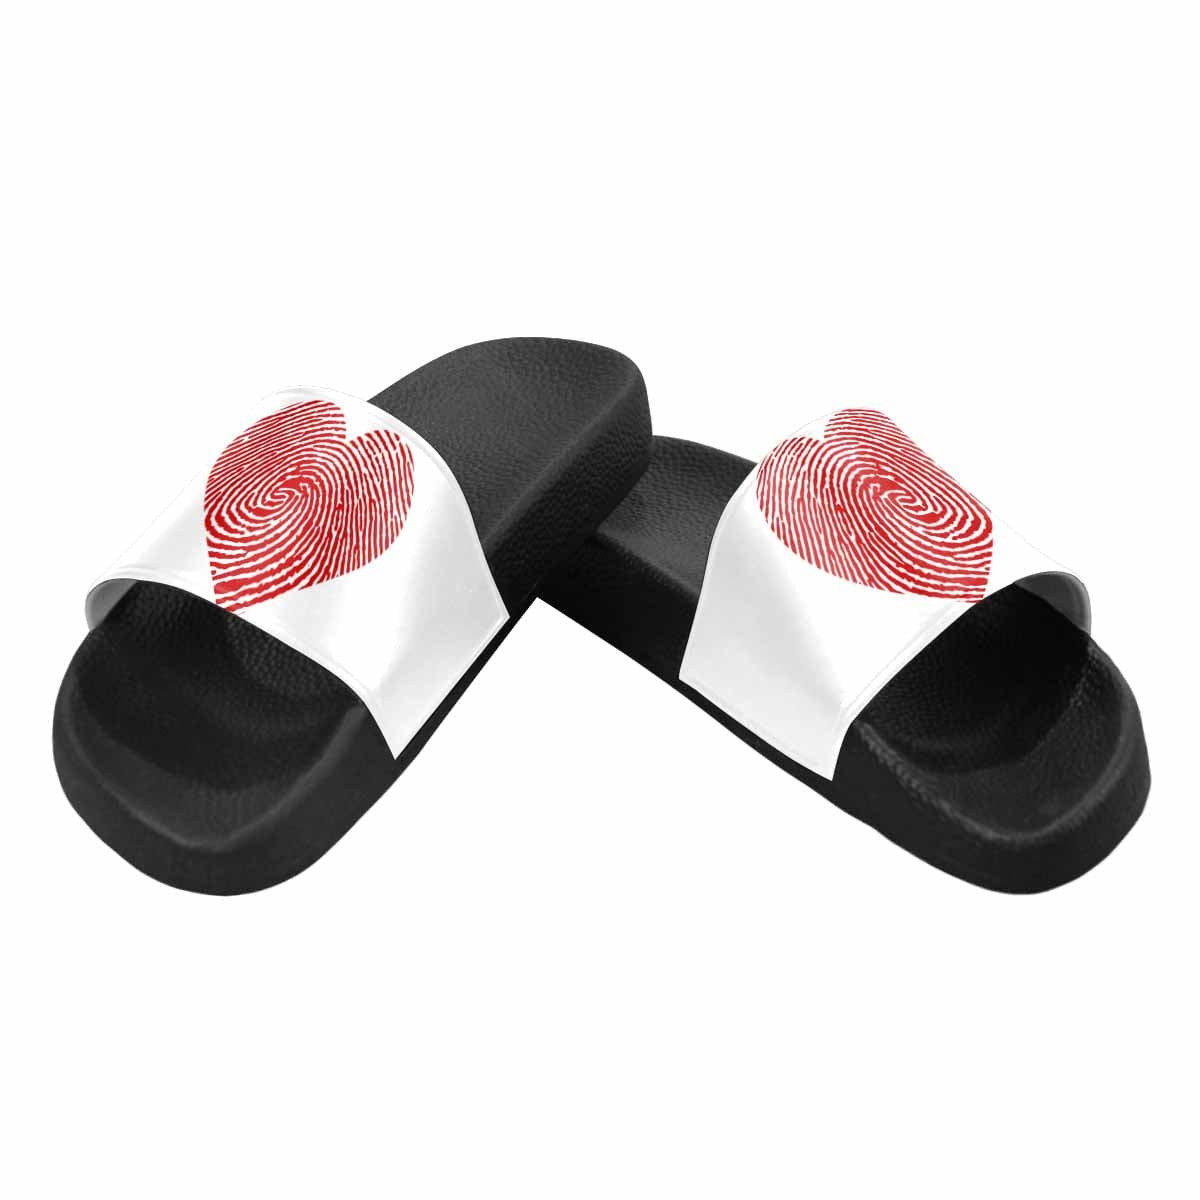 Womens Slide Sandals White And Red Heart - Womens | Slides